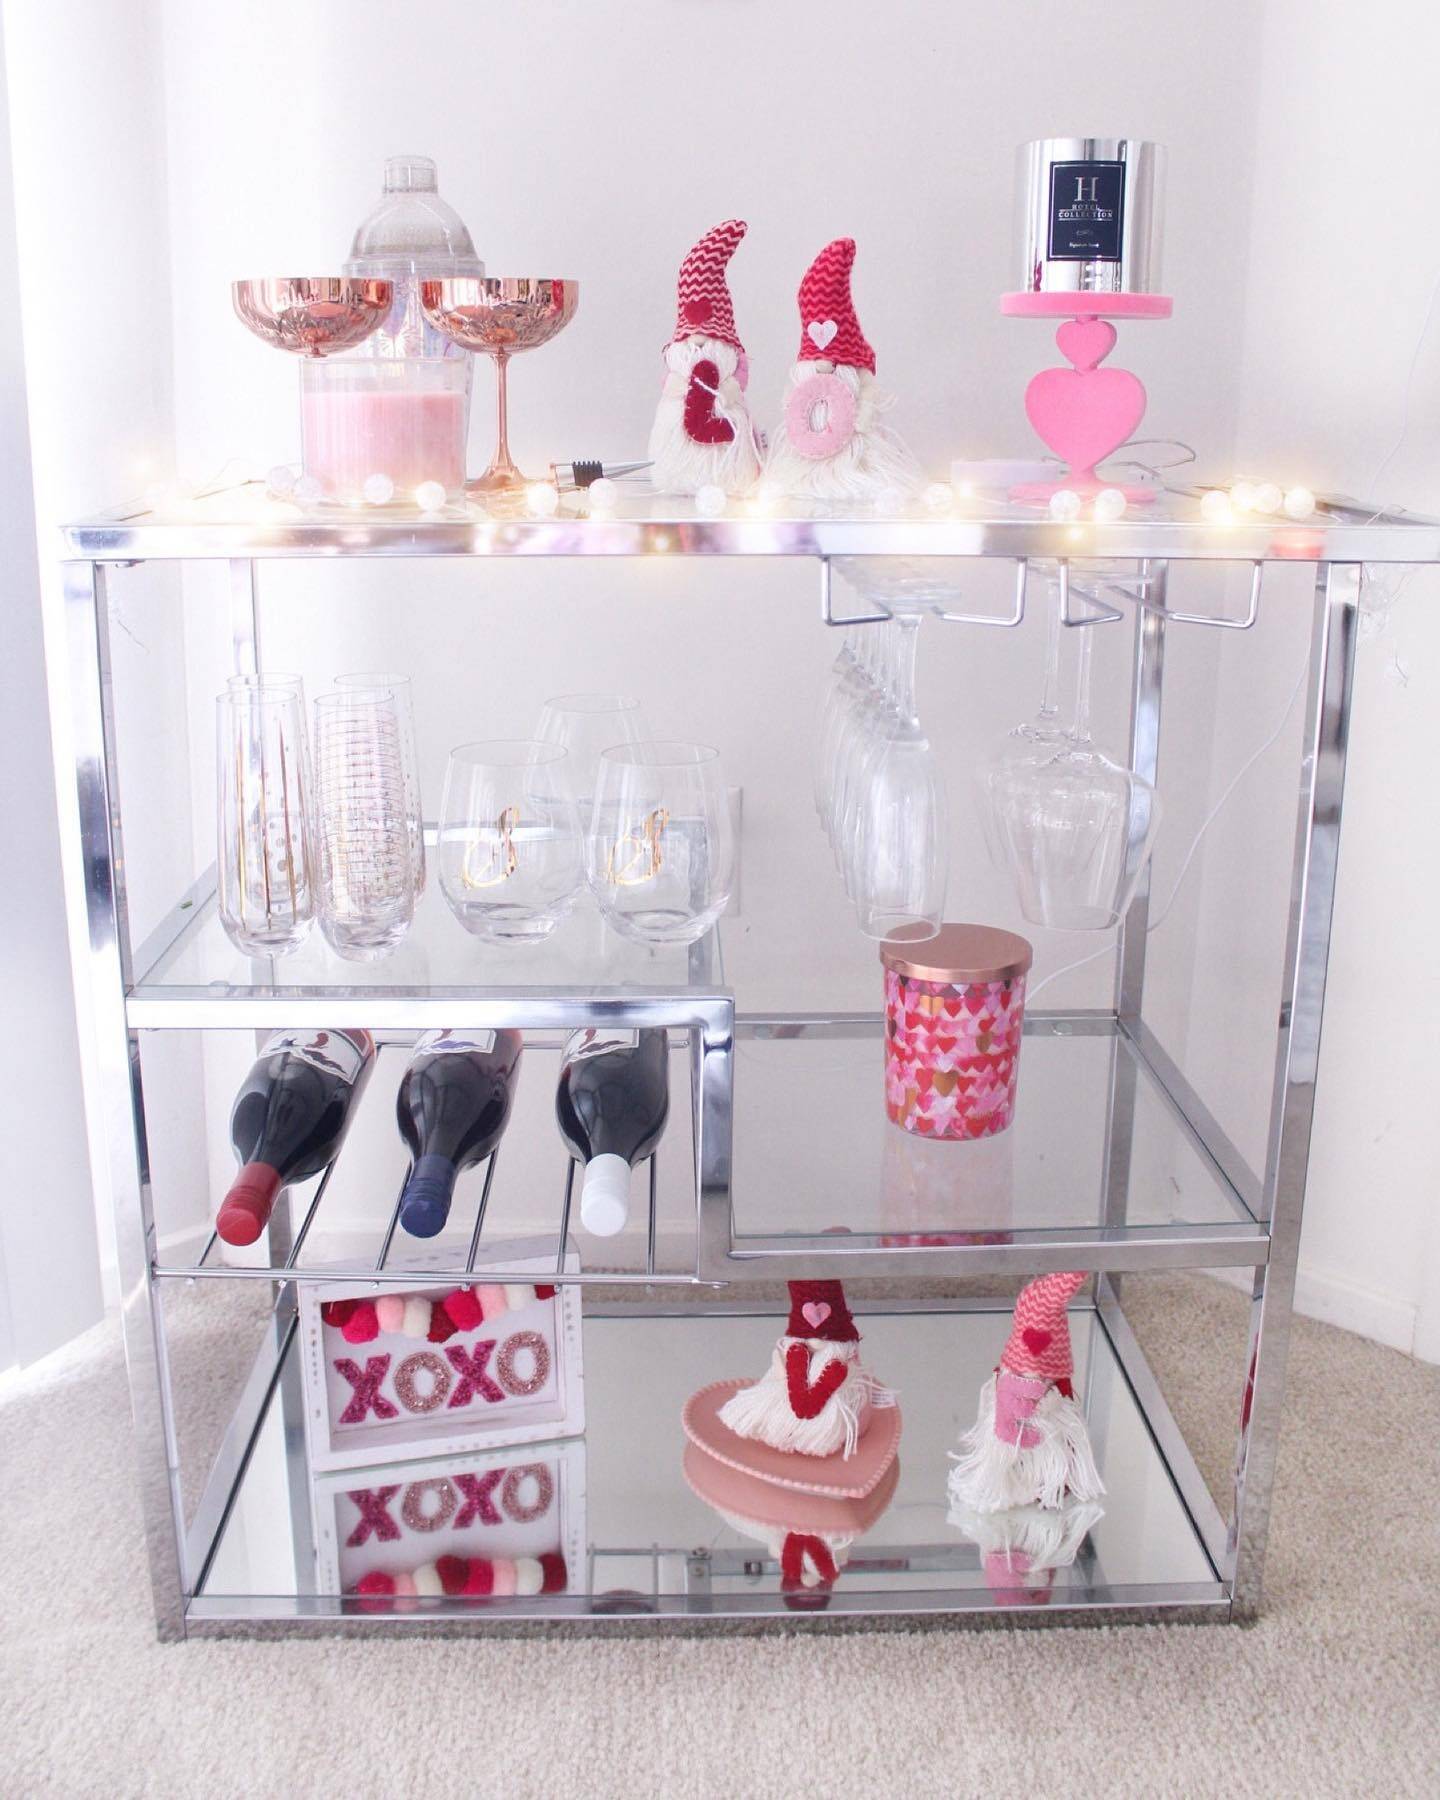 Valentine’s Day was made for me! All pink everything 💗❤️🎀🌹
.
.
Bar cart linked on my @shop.ltk app!👇🏼
Follow my shop @selahchristeen on the @shop.LTK app to shop this post and get my exclusive app-only content!
.
#liketkit 
@shop.ltk
https://liketk.it/3weUm
.
#barcart #valentinesday #valentinesdaybarcart #barcartstyling #barcartdecor #valentinesdecor #michiganblogger #pinkdecor #allpinkeverything #bathandbodyworks #homegoodsfinds #valentine